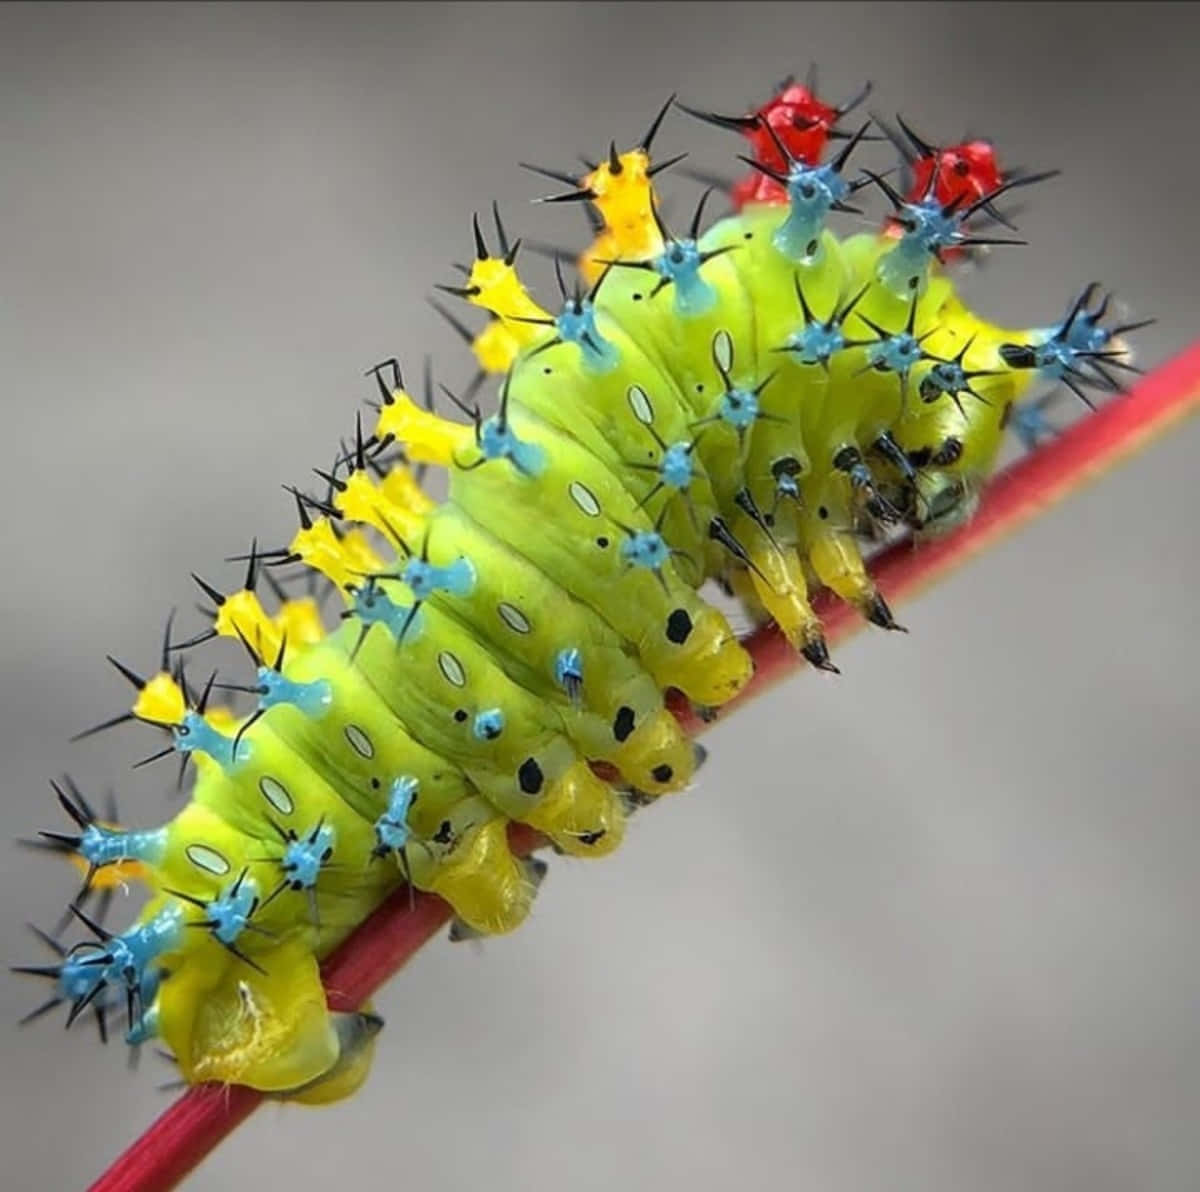 "The Wonder of Life: A Colorful Caterpillar"